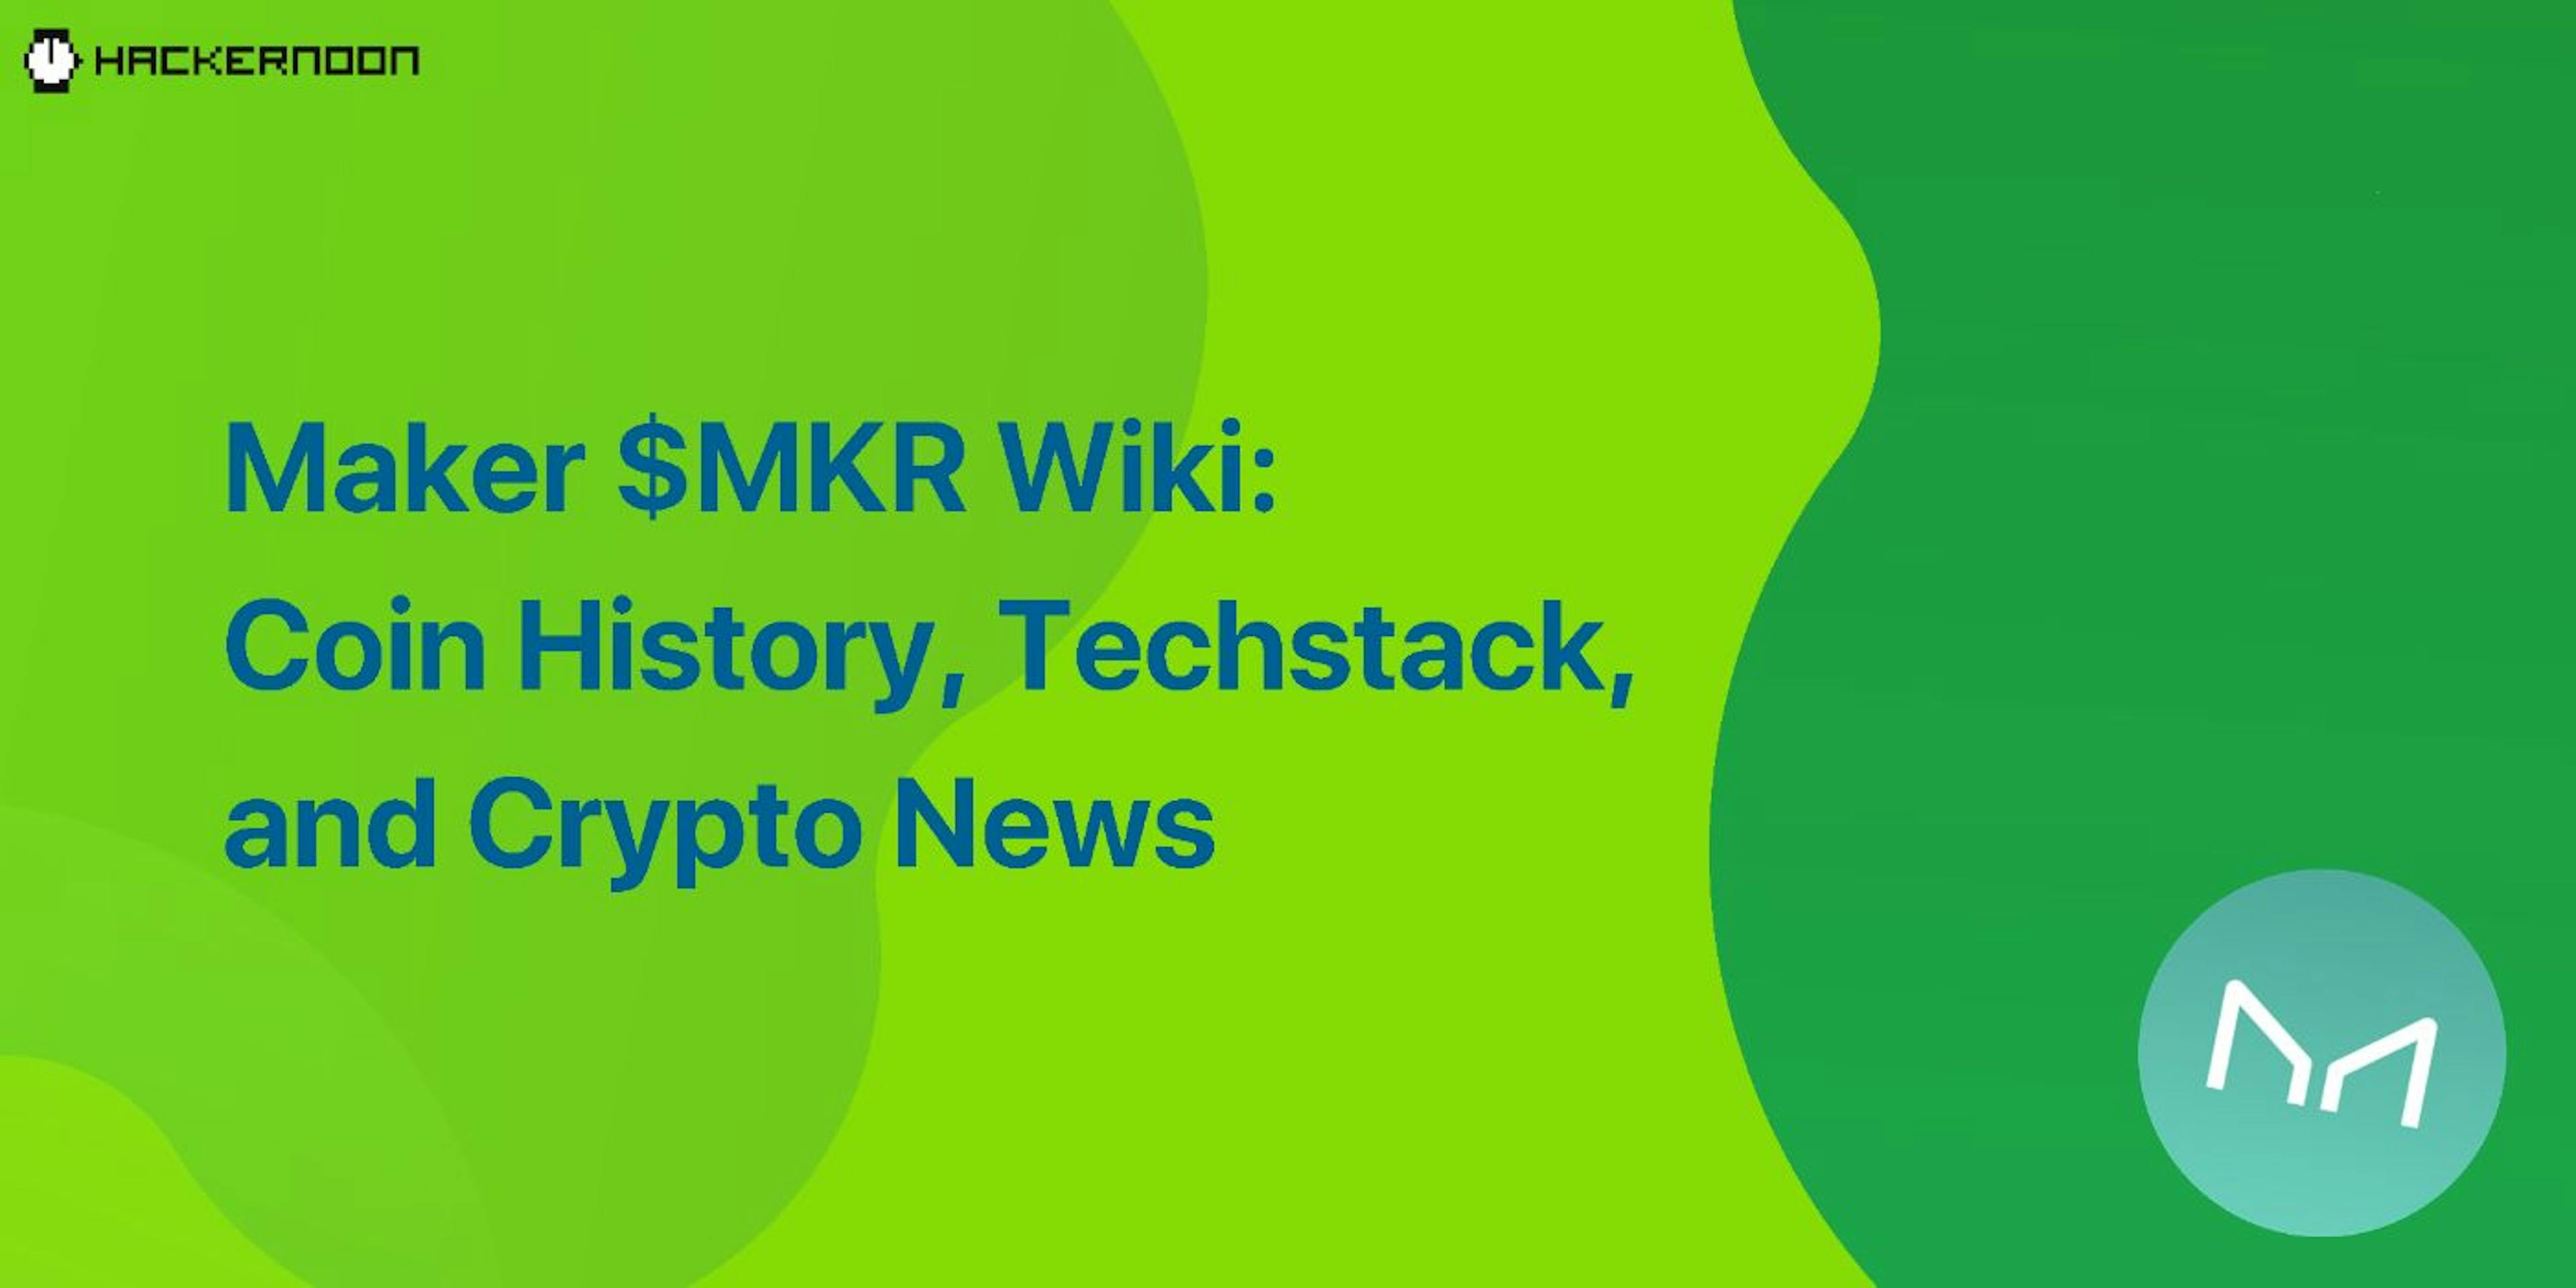 featured image - Maker $MKR Wiki: Coin History, Techstack, and Crypto News